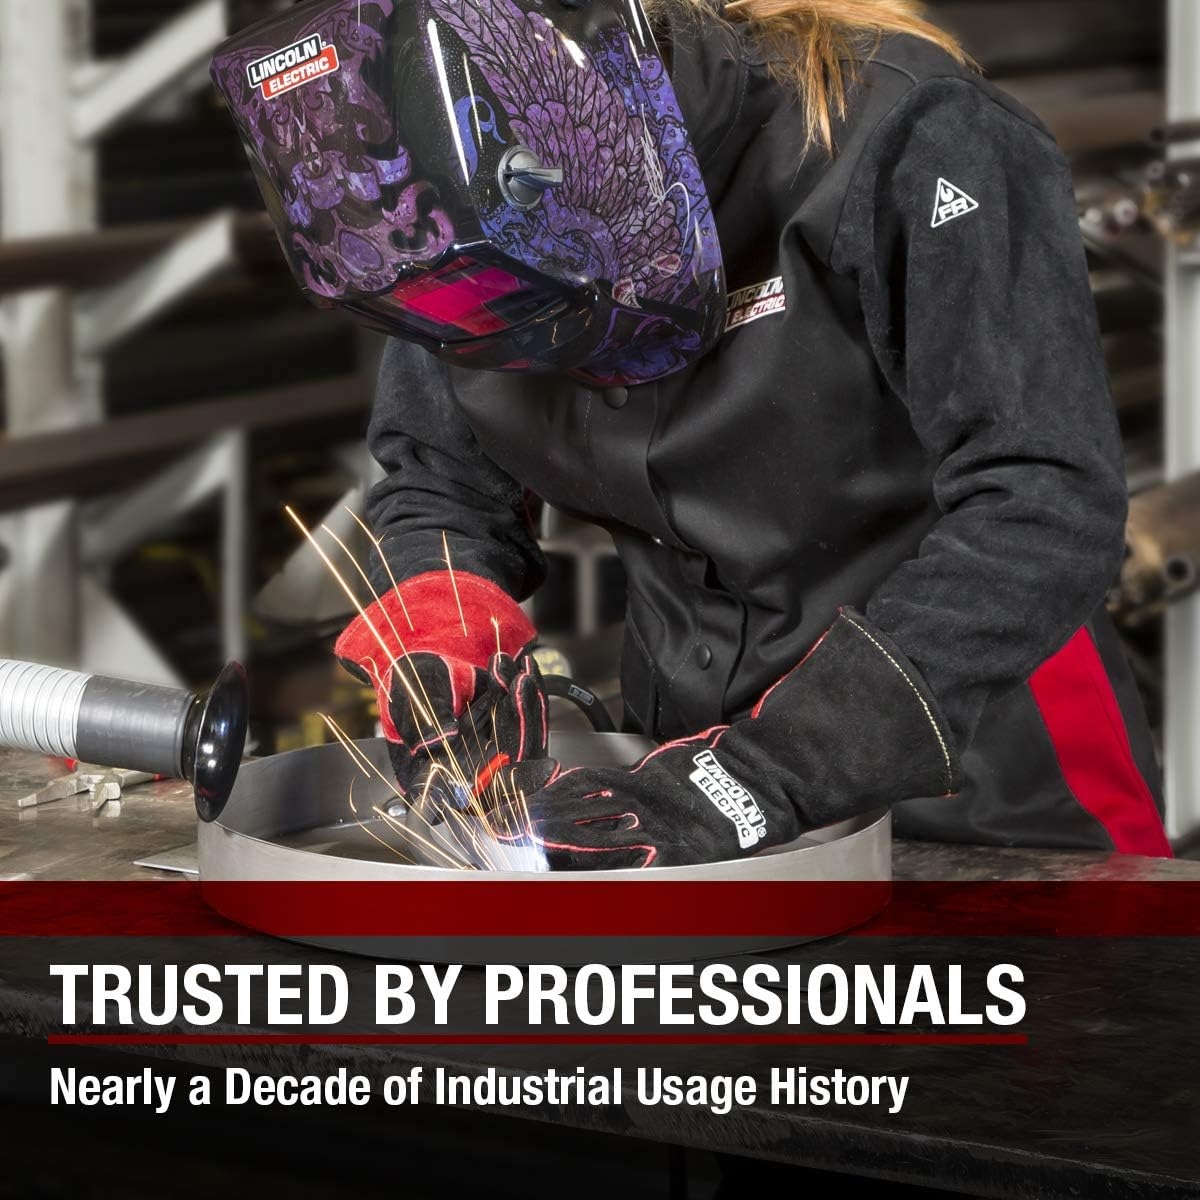 Lincoln Electric Women's MIG Stick Welding Gloves |Kevlar Stitching| Women's Small | K3232-S